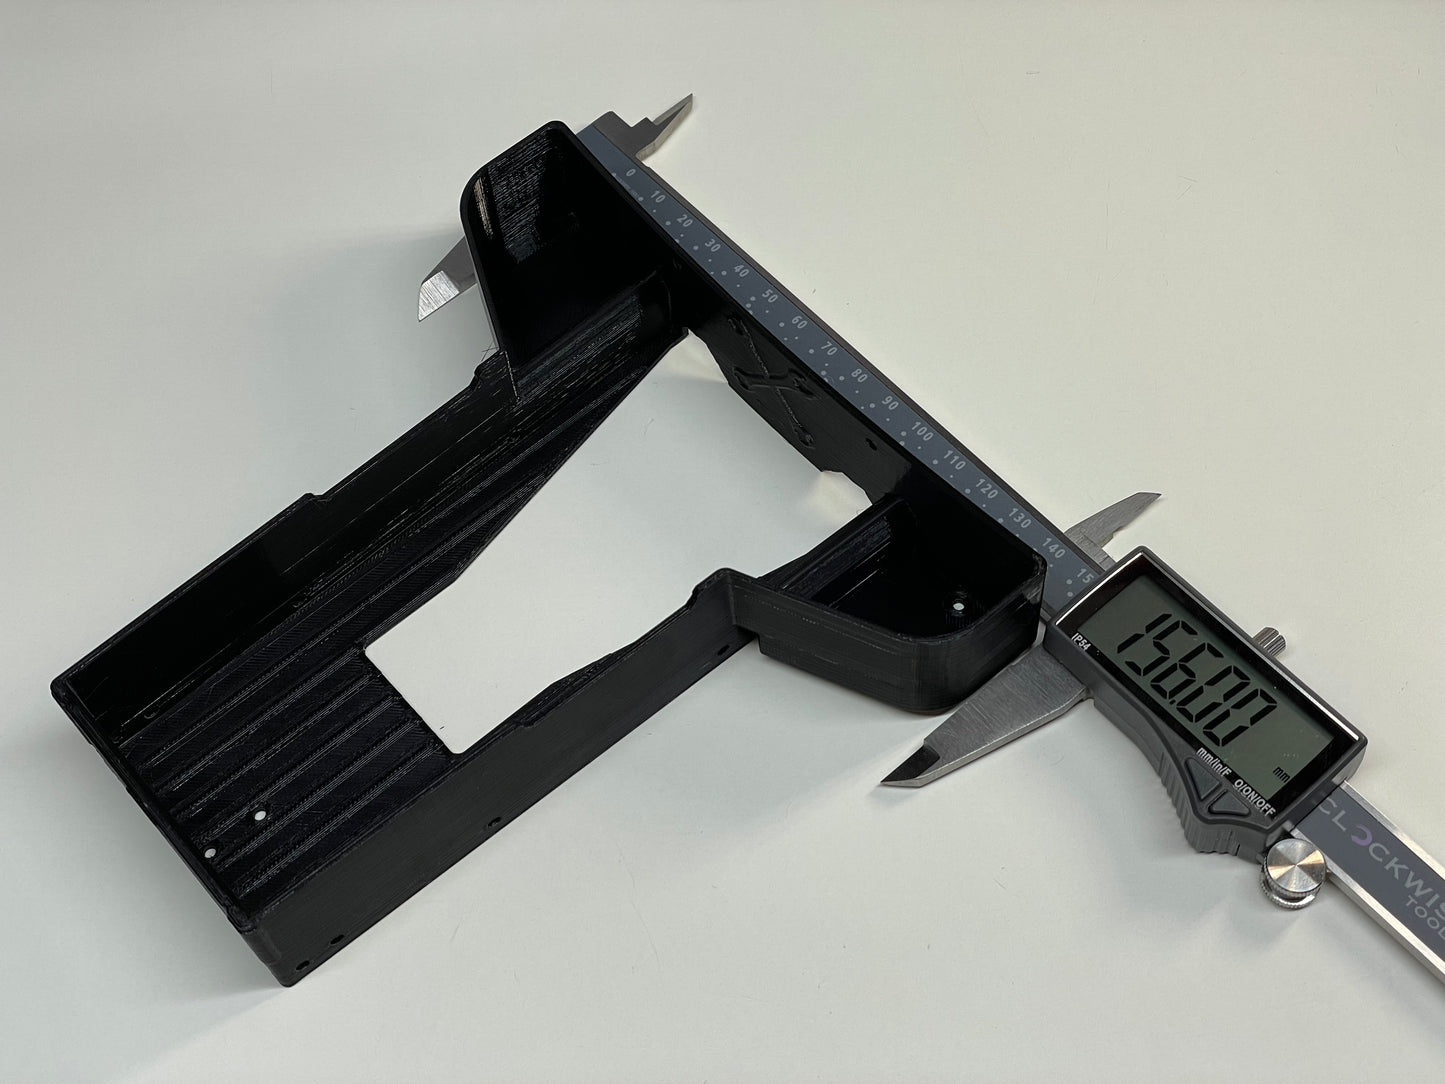 Drop Bed for the Gspeed V3 Chassis and Power Wagon Body